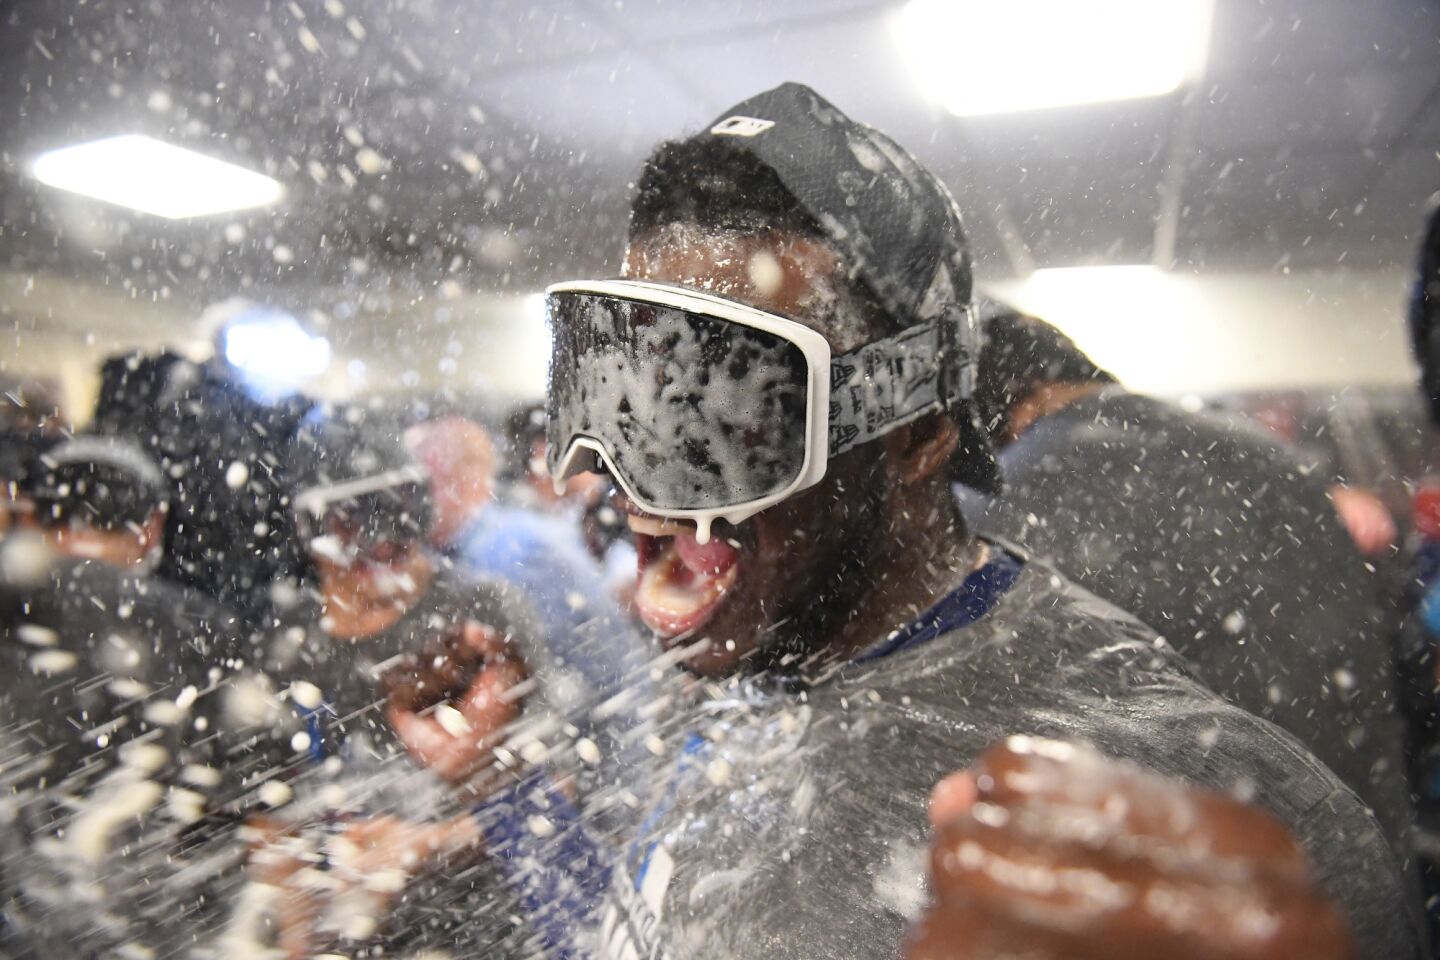 Dodgers Yasiel Puig celebrates in locker room after Dodgers defeated Brewers 5-1.